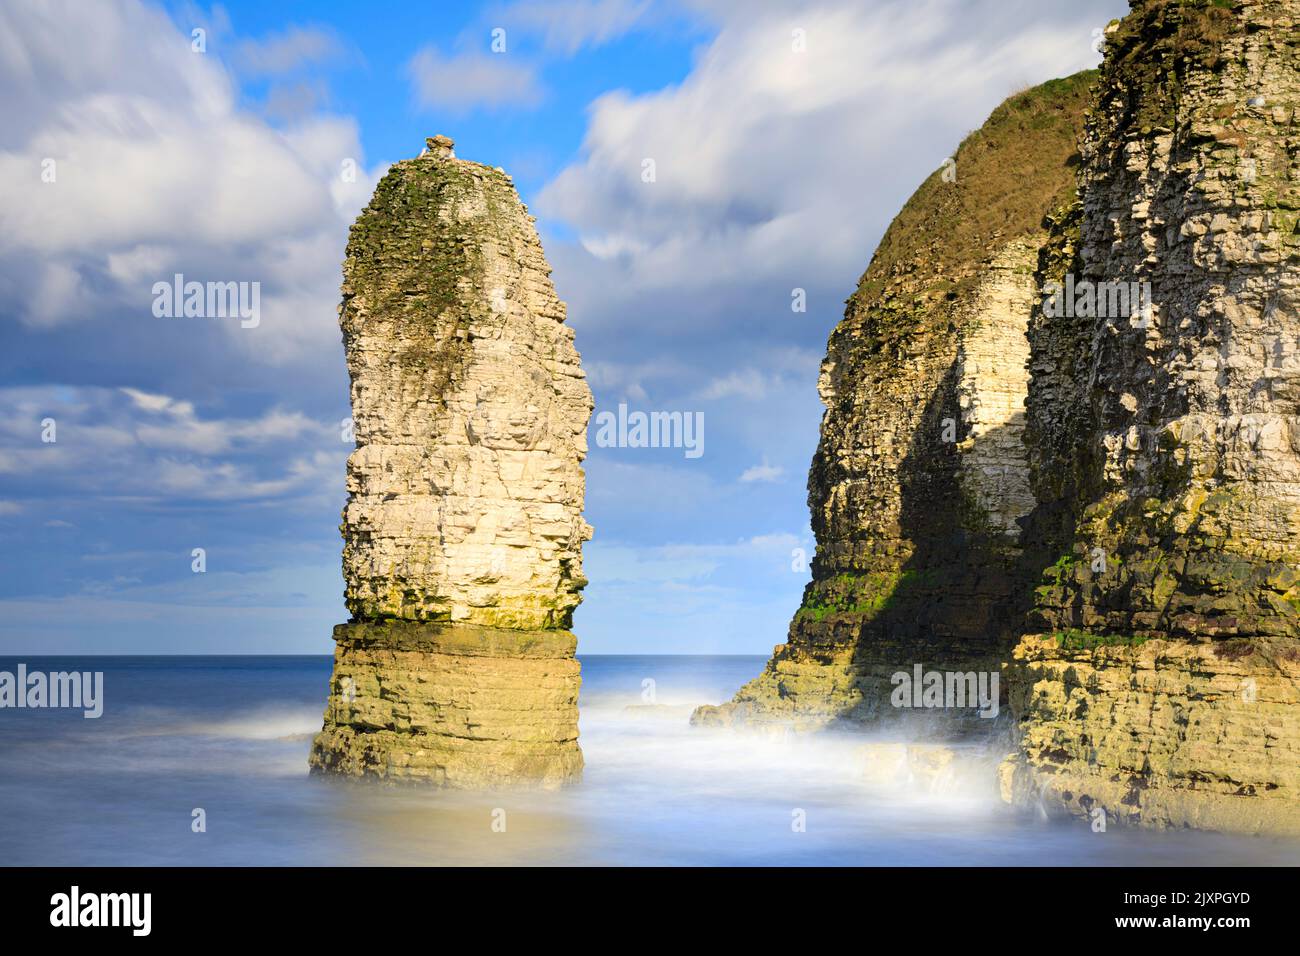 A sea stack in Selwicks Bay near Flamborough Head in Yorkshire captured using a long shutter speed. Stock Photo